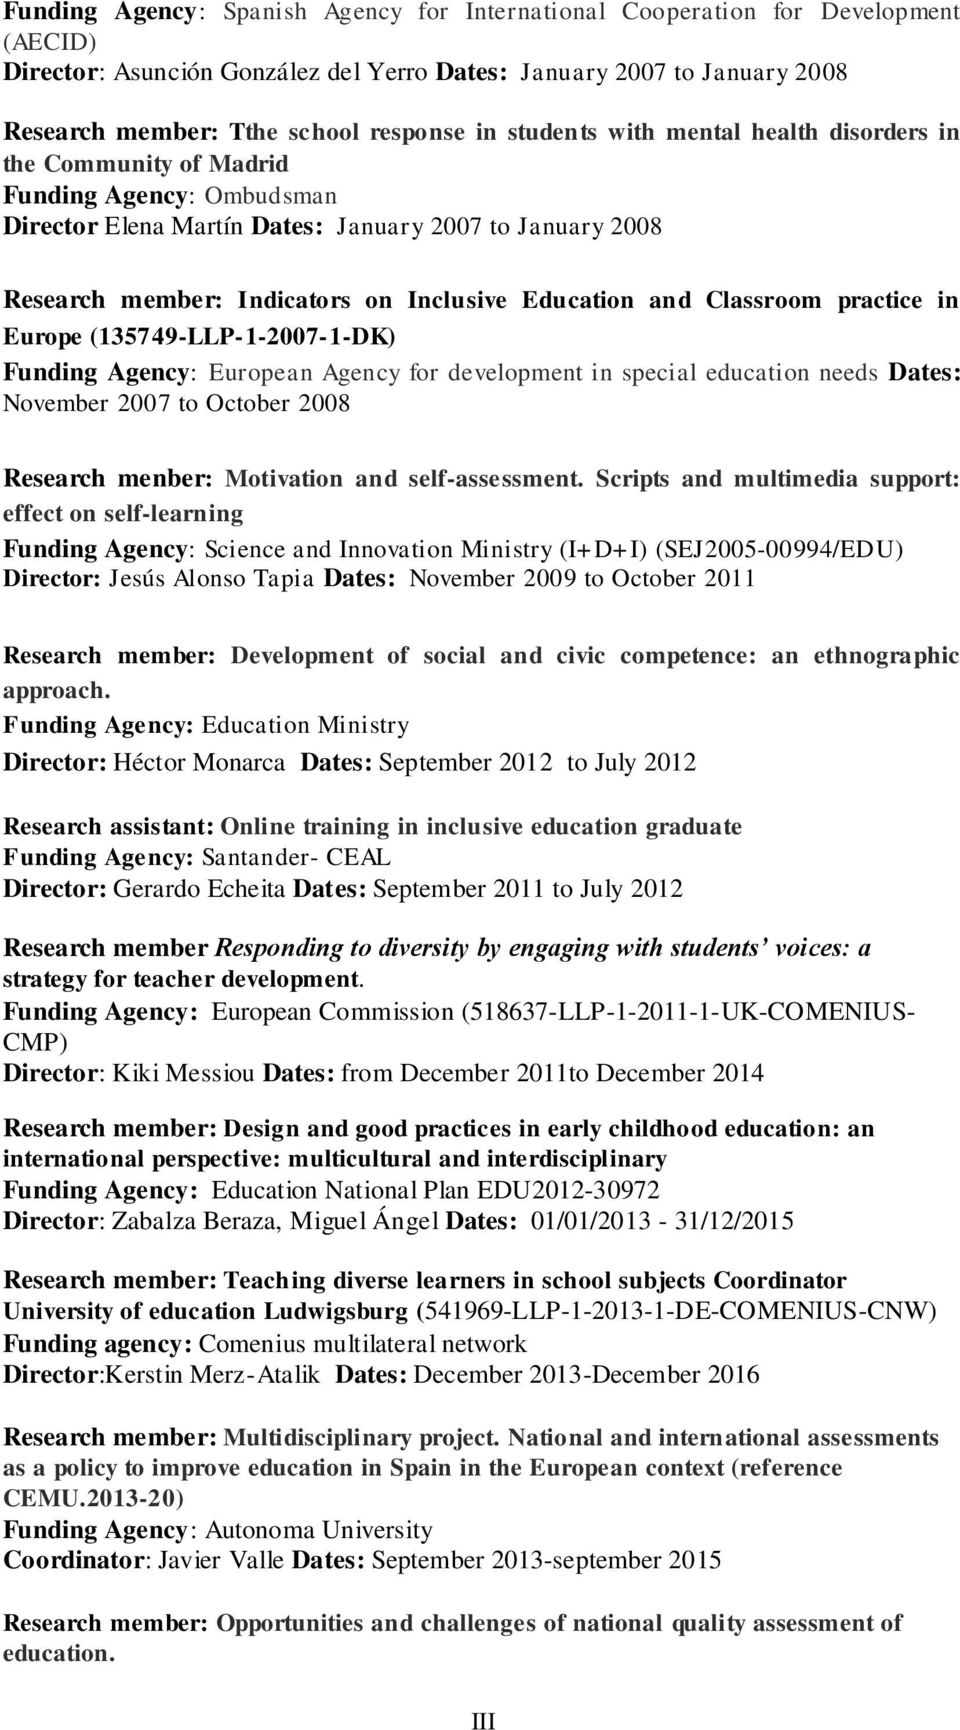 and Classroom practice in Europe (135749-LLP-1-2007-1-DK) Funding Agency: European Agency for development in special education needs Dates: November 2007 to October 2008 Research menber: Motivation